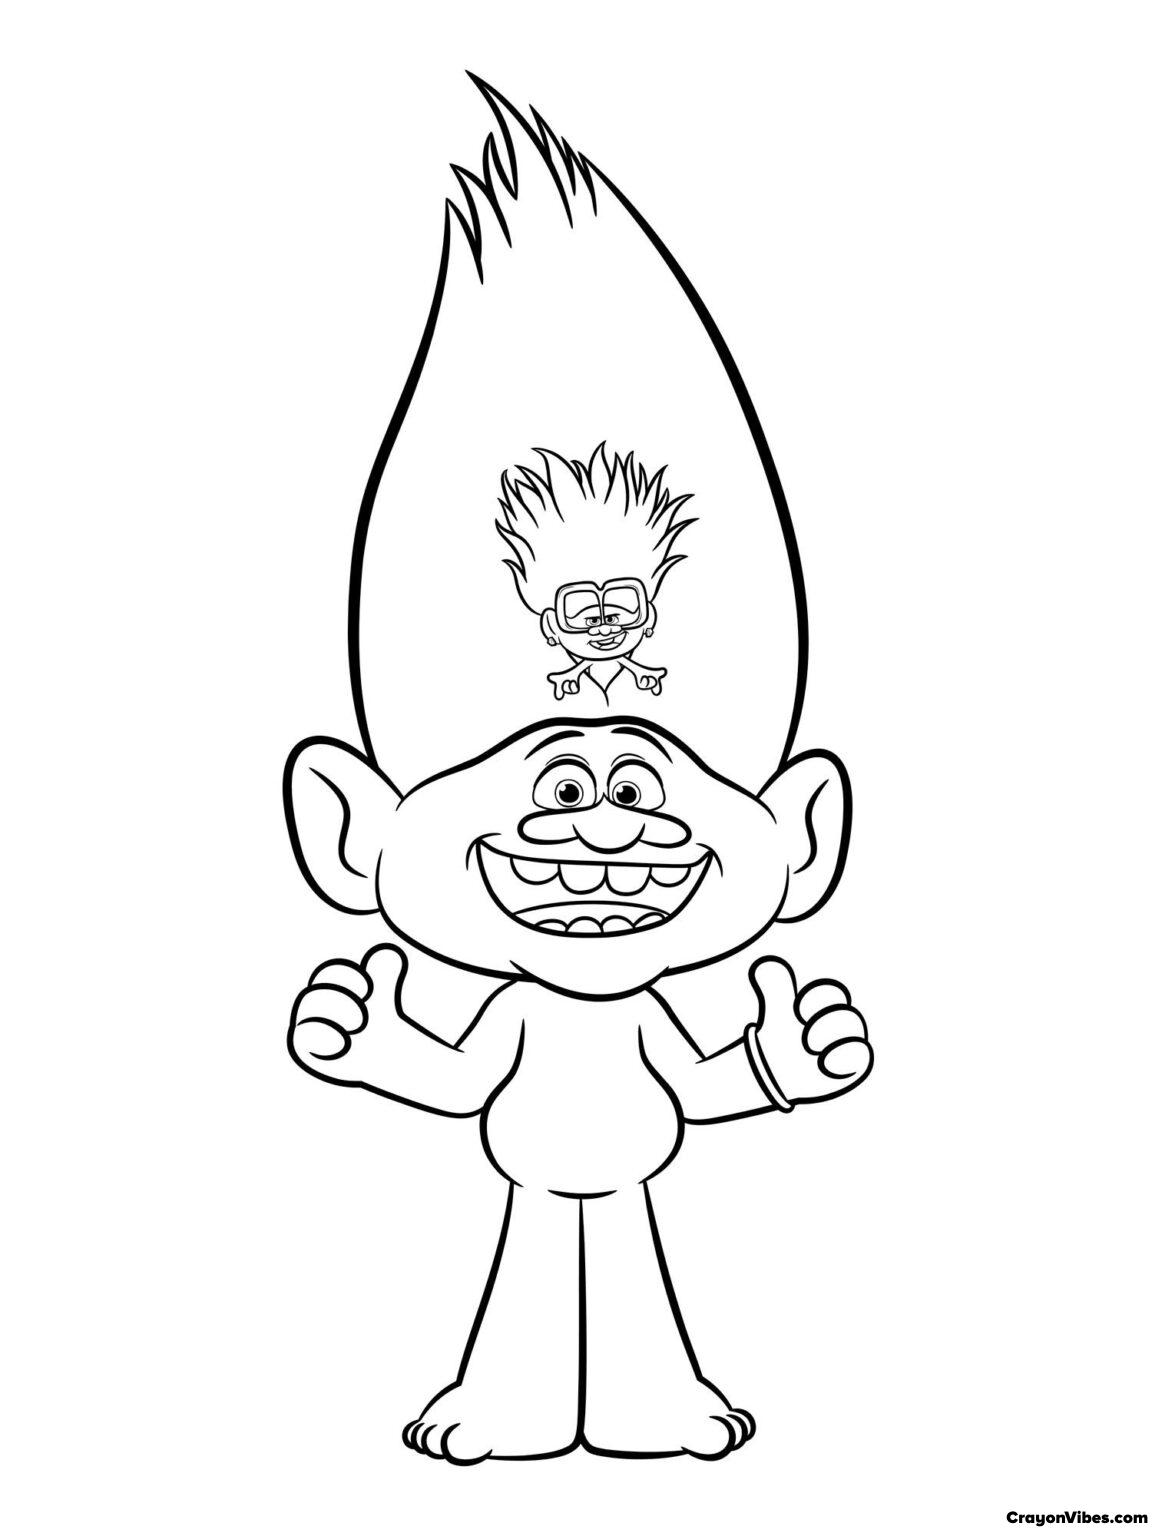 Trolls Coloring Pages Free Printable for Kids